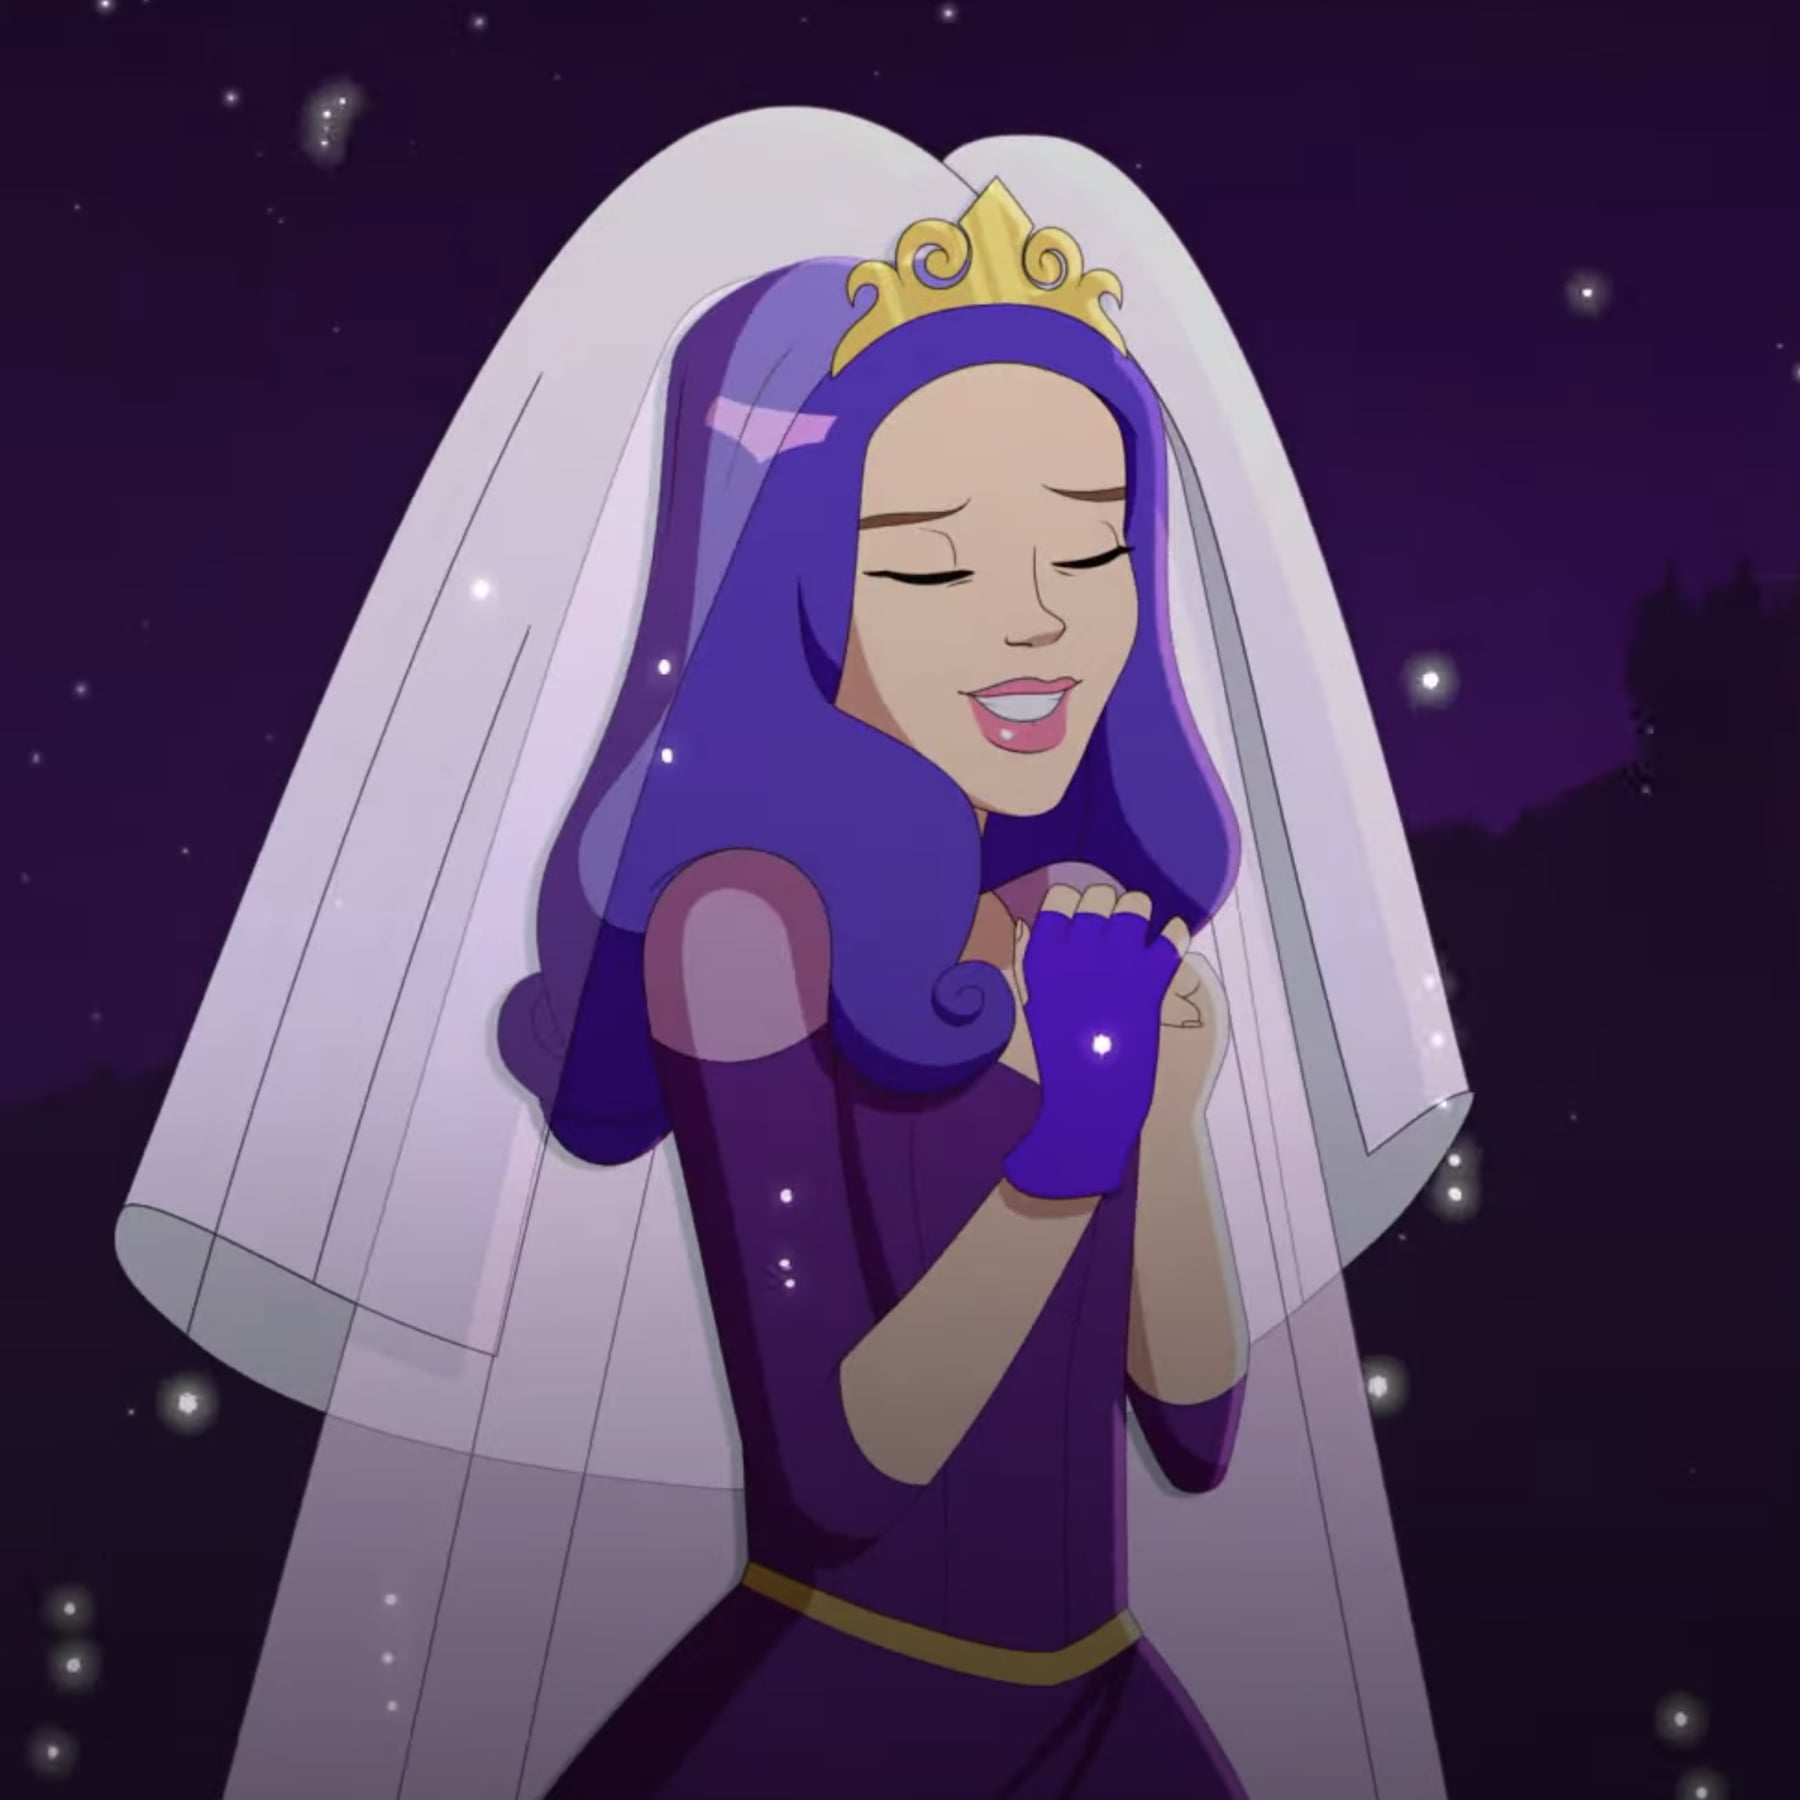 Descendants: The Royal Wedding” Animated Special Coming to Disney Channel